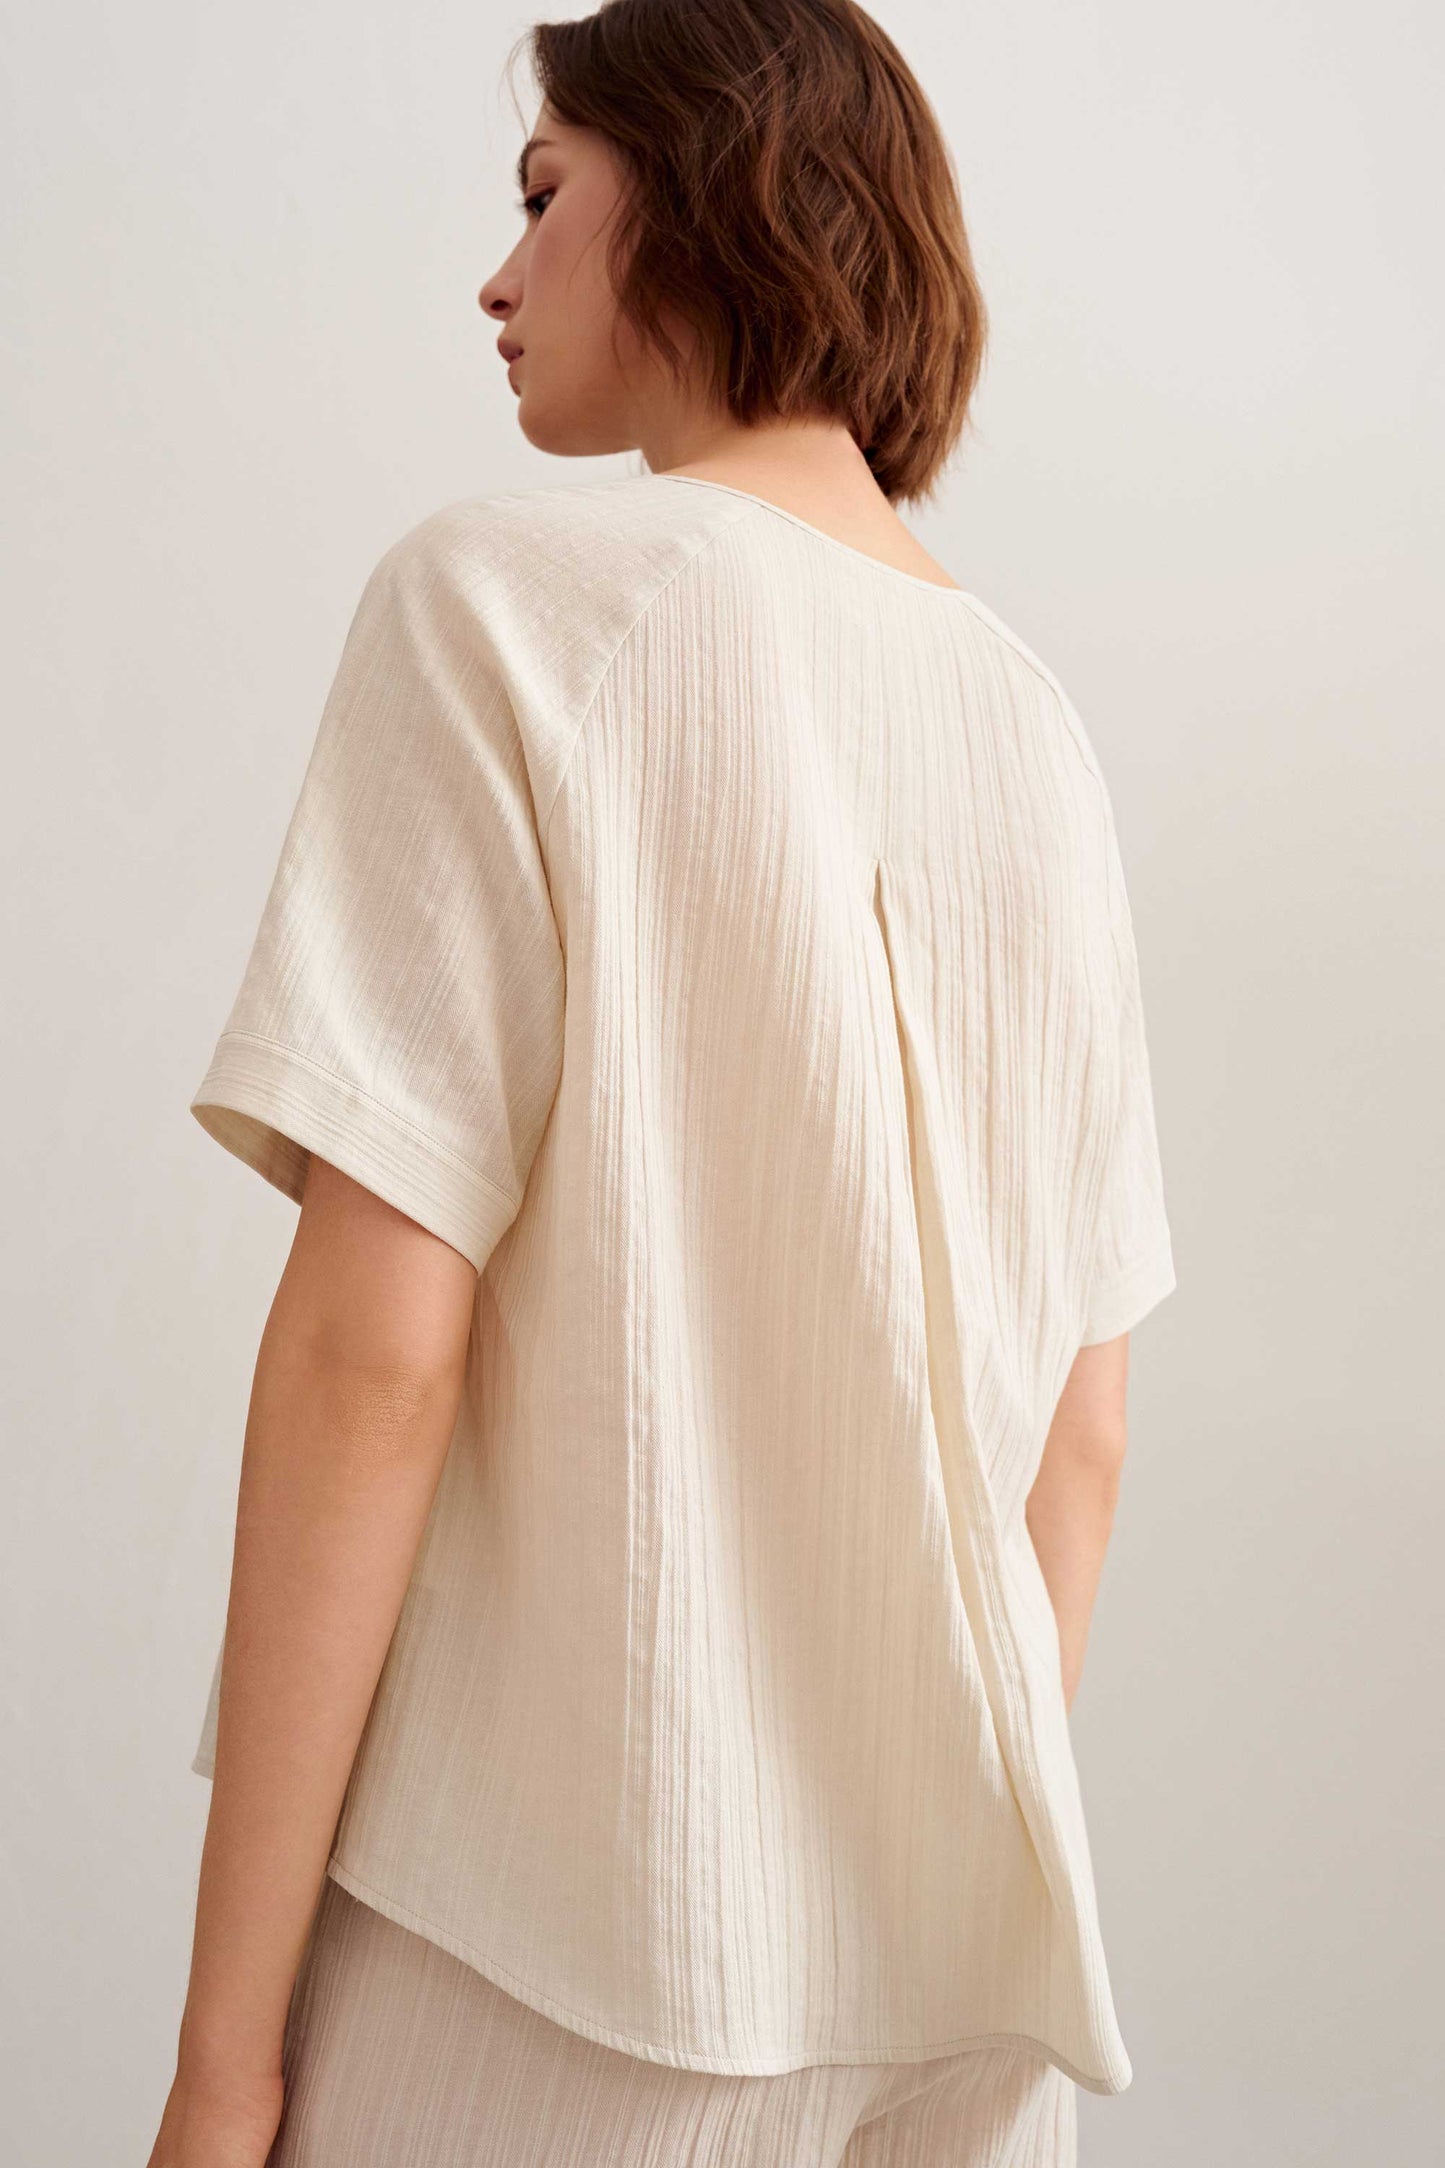 back of a woman wearing a light beige short sleeve tee and pants. 